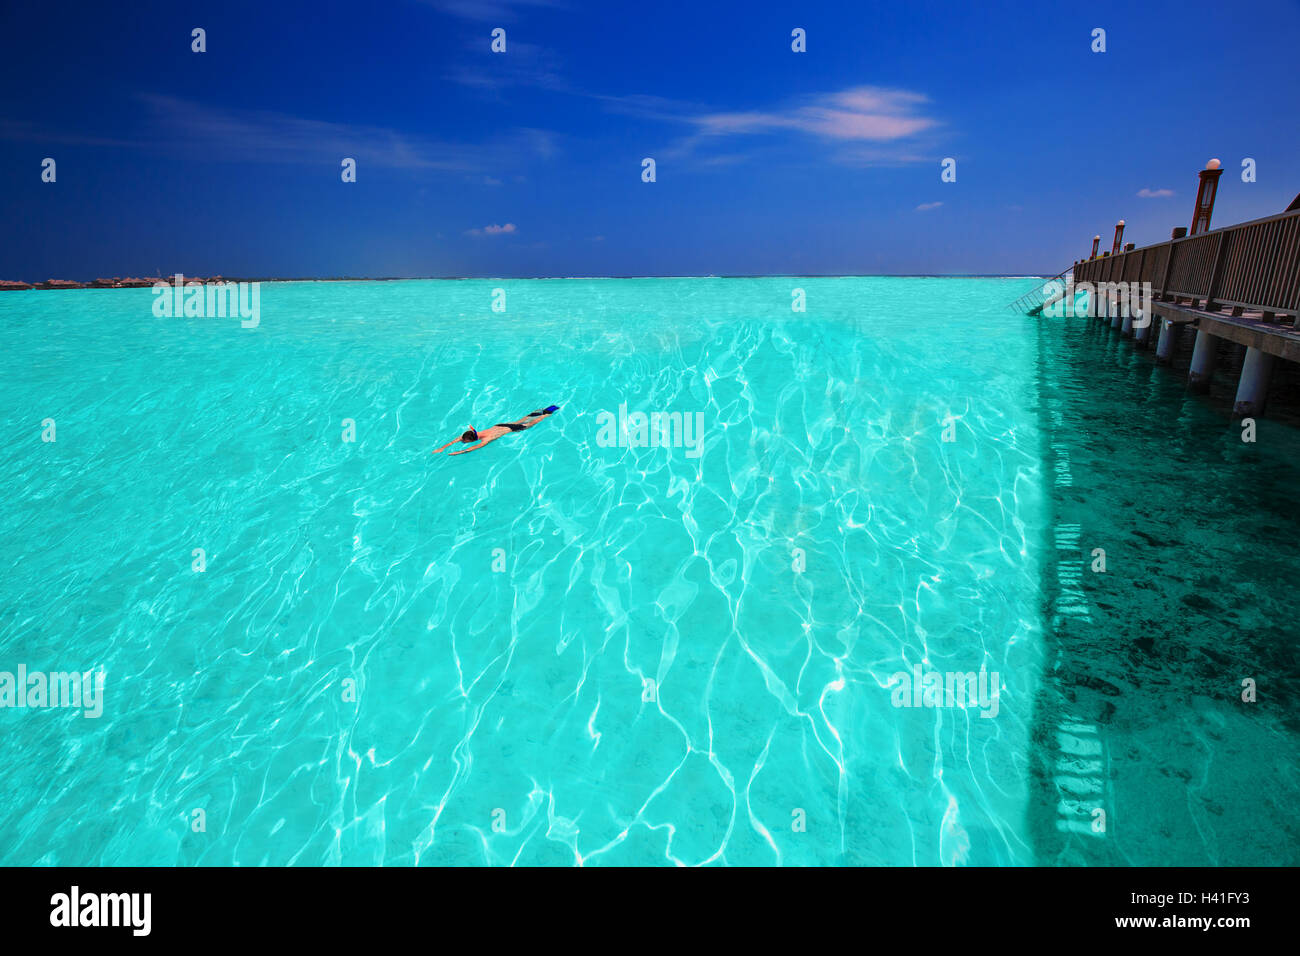 Young man snorkling in tropical lagoon with over water bungalows Stock Photo